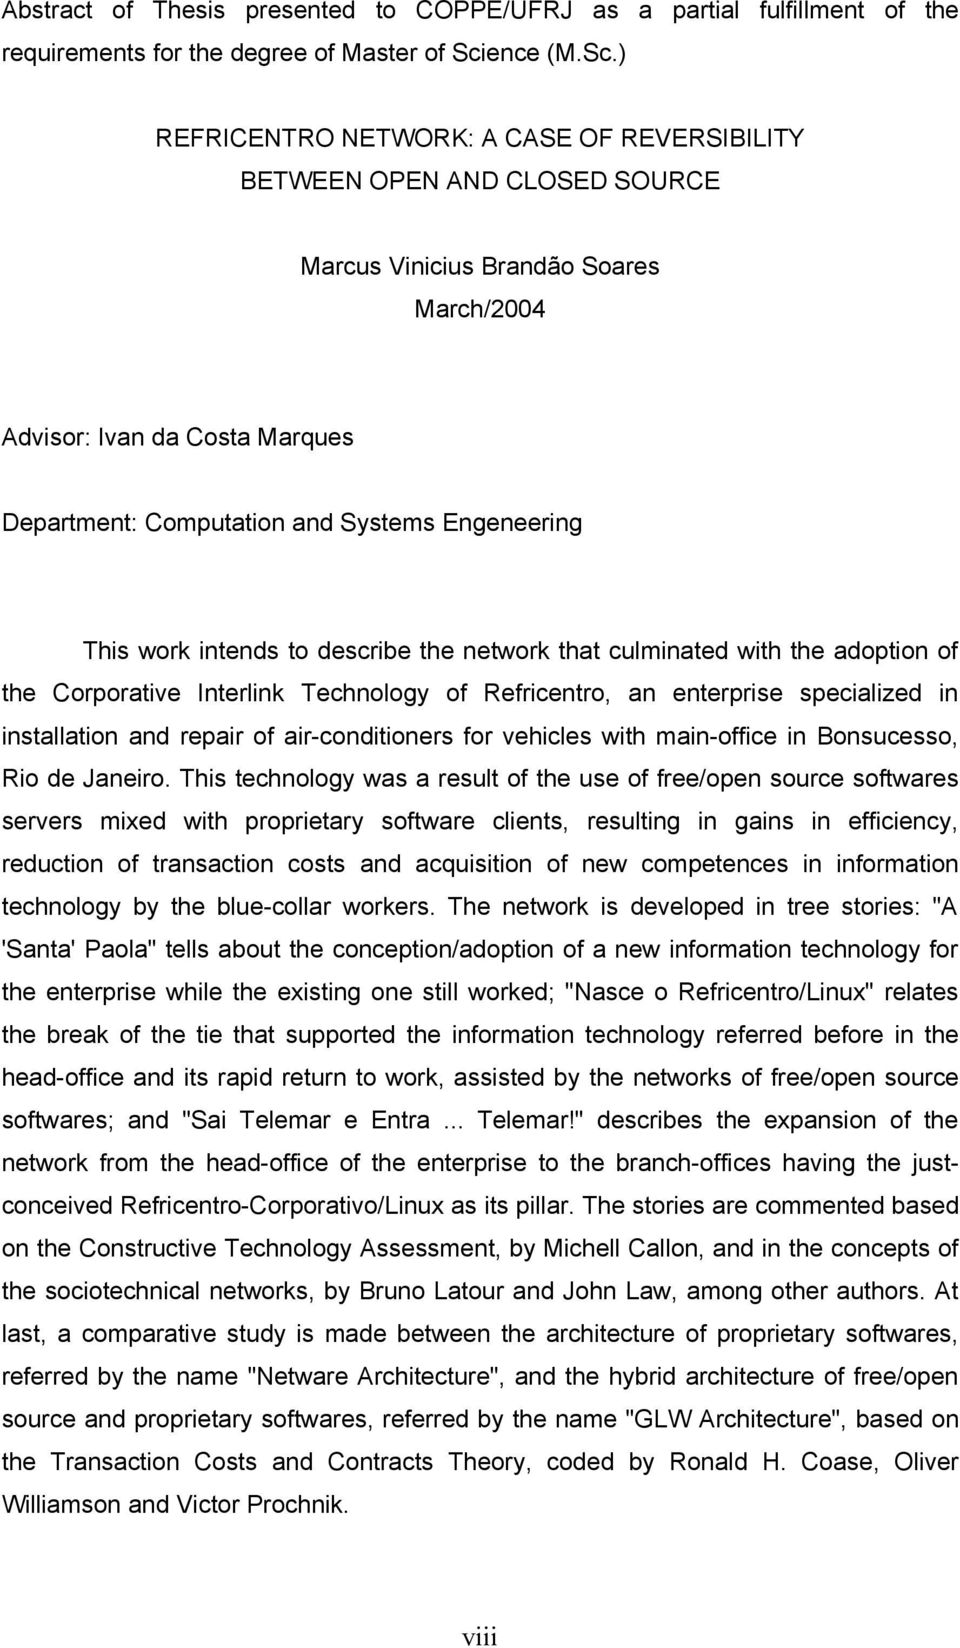 ) REFRICENTRO NETWORK: A CASE OF REVERSIBILITY BETWEEN OPEN AND CLOSED SOURCE Marcus Vinicius Brandão Soares March/2004 Advisor: Ivan da Costa Marques Department: Computation and Systems Engeneering